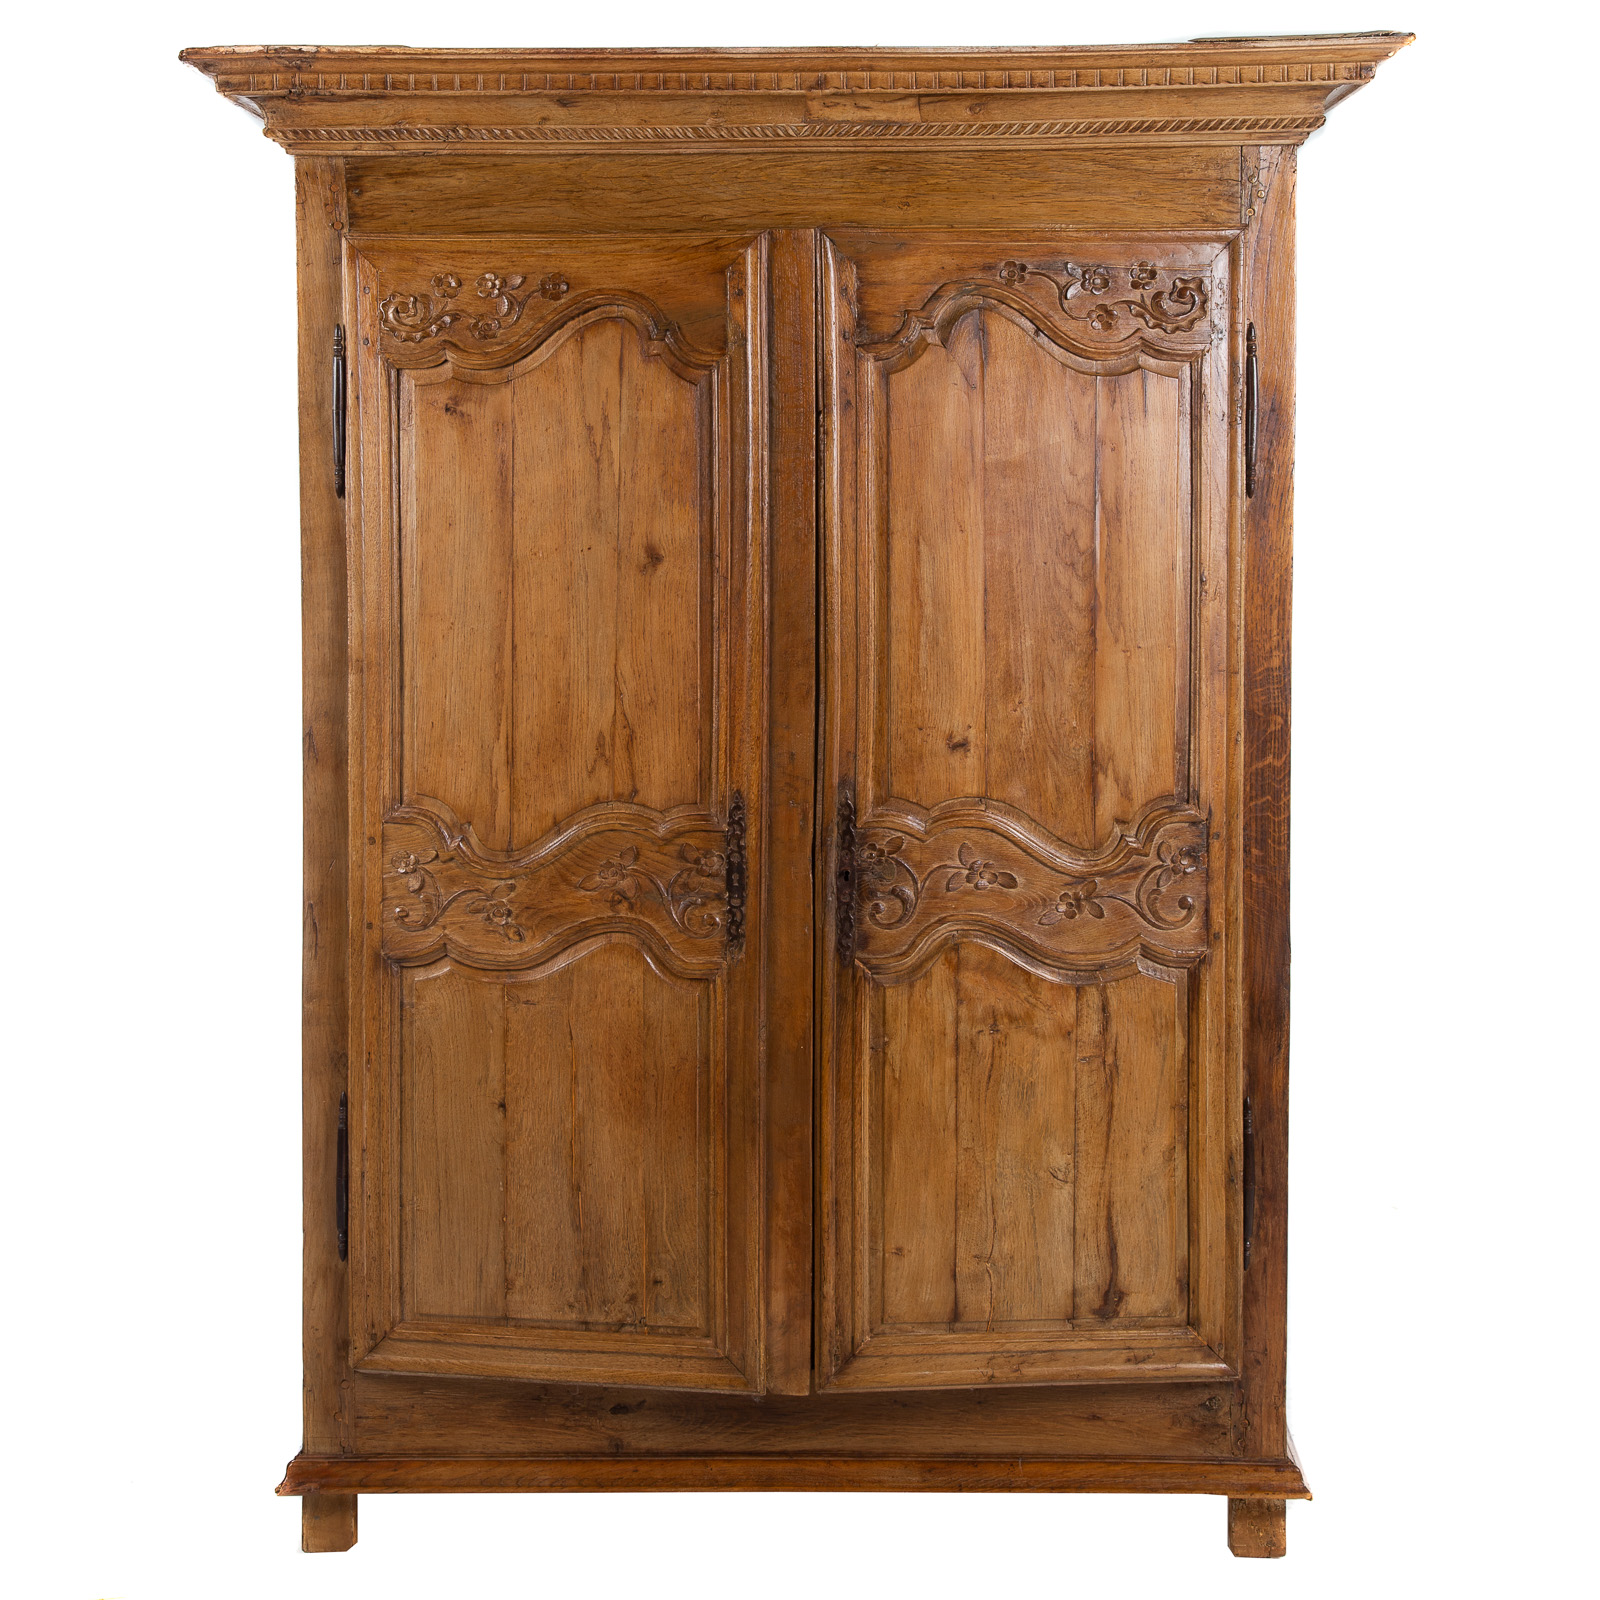 FRENCH MIXED WOOD ARMOIRE Late